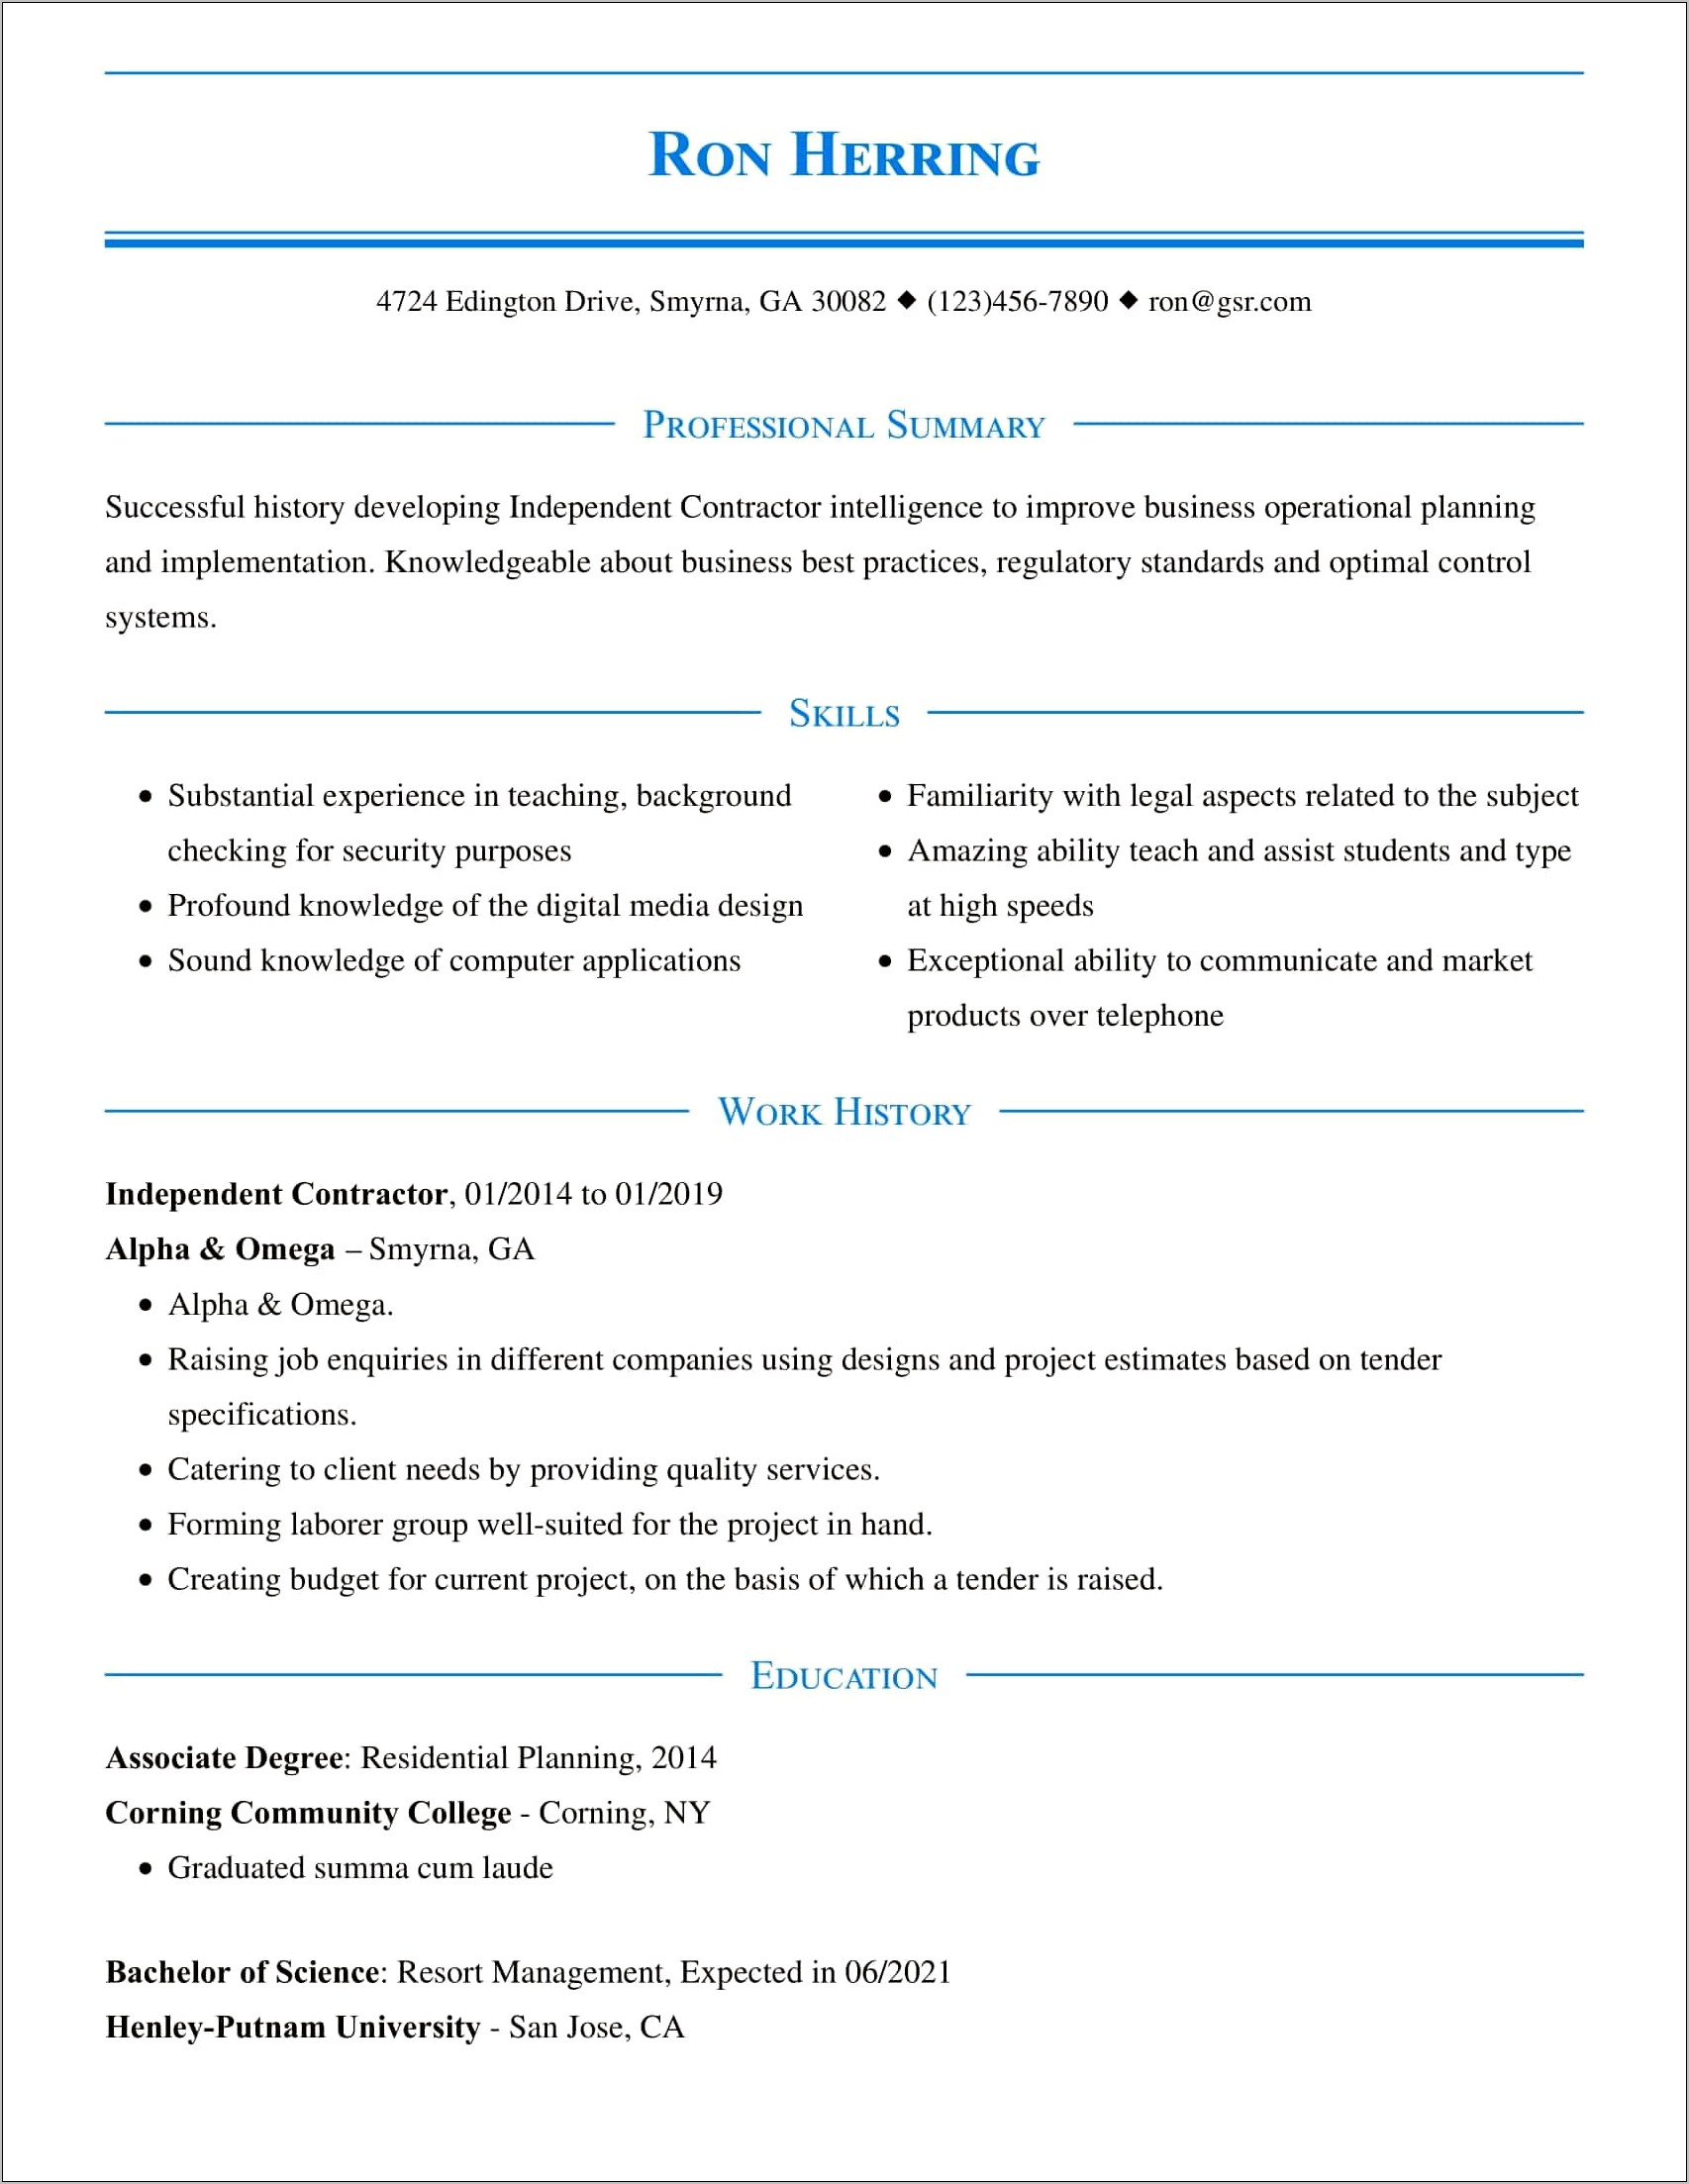 Hybrid Resume Template Free Download